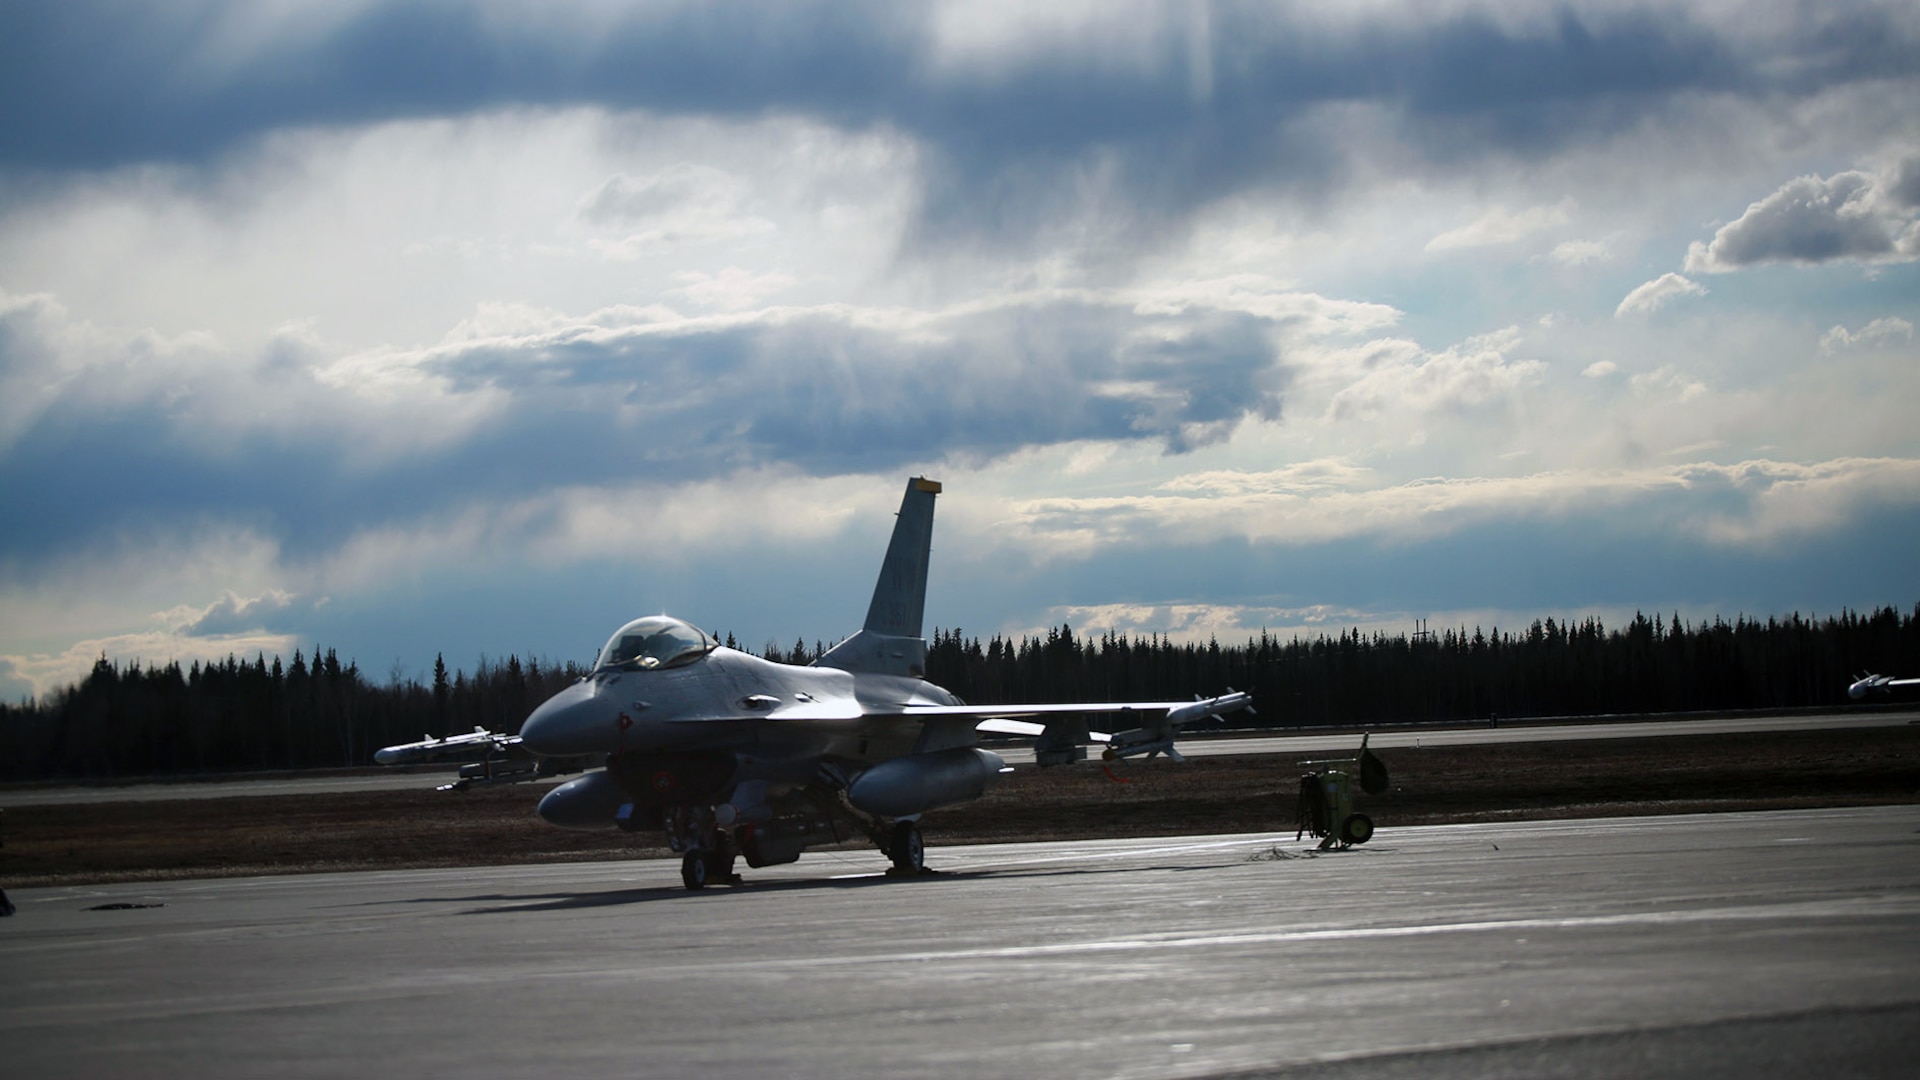 A U.S. Air Force F-16 Fighting Falcon aircraft assigned to the 13th Fighter Squadron, Misawa Air Base, Japan, taxis out during Exercise Northern Edge 2017, at Eileson Air Force Base, Alaska, May 4, 2017. Northern Edge is Alaska’s largest and premier joint training exercise designed to practice operations, techniques and procedures as well as enhance interoperability among the services. Thousands of participants from all the services—Airmen, Soldiers, Sailors, Marines and Coast Guard personnel from active duty, Reserve and National Guard units—are involved. 

